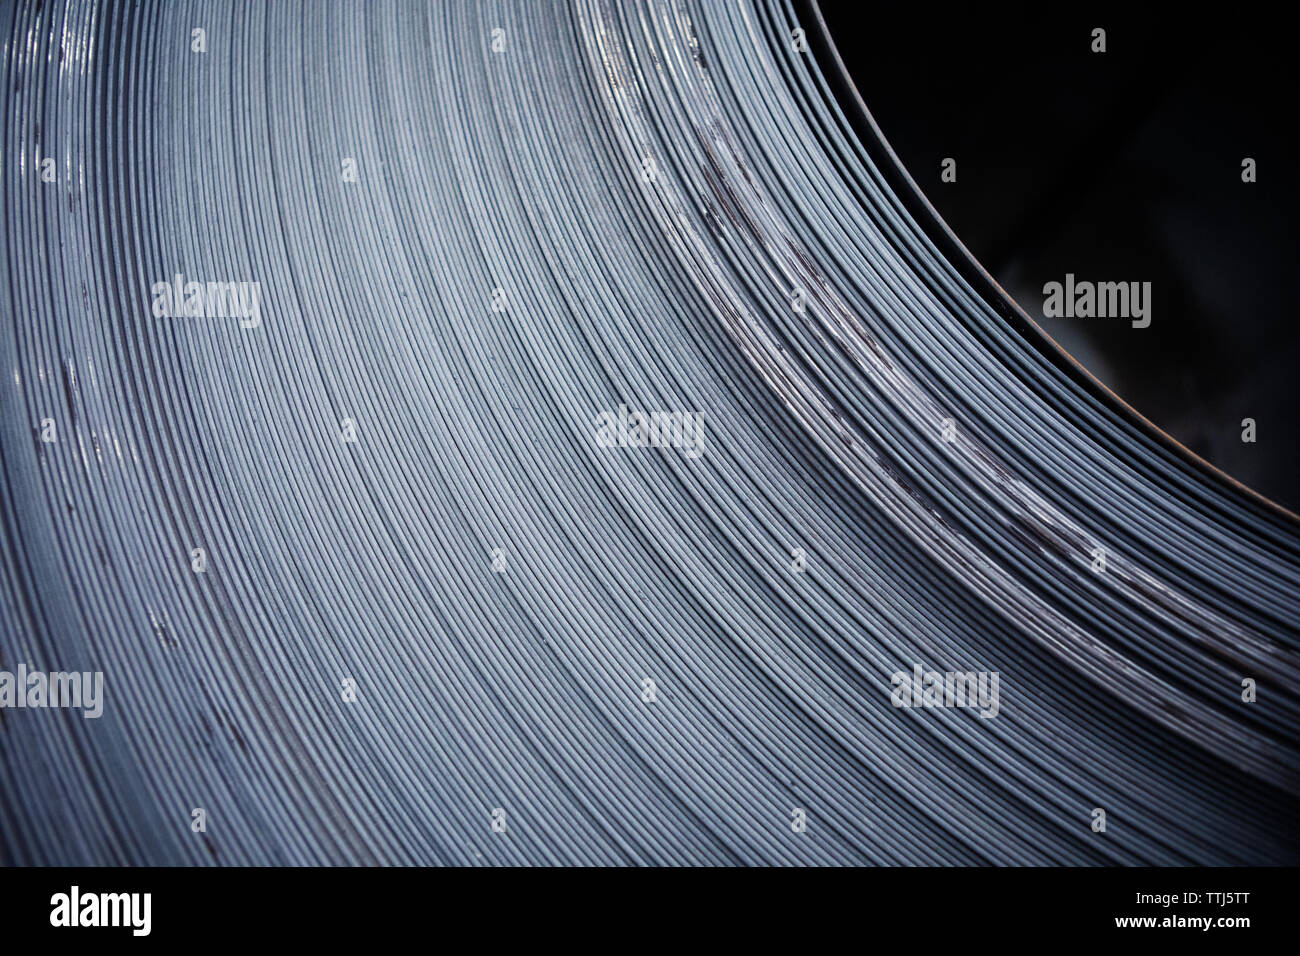 Extreme close-up of rolled up sheet metals at industry Stock Photo